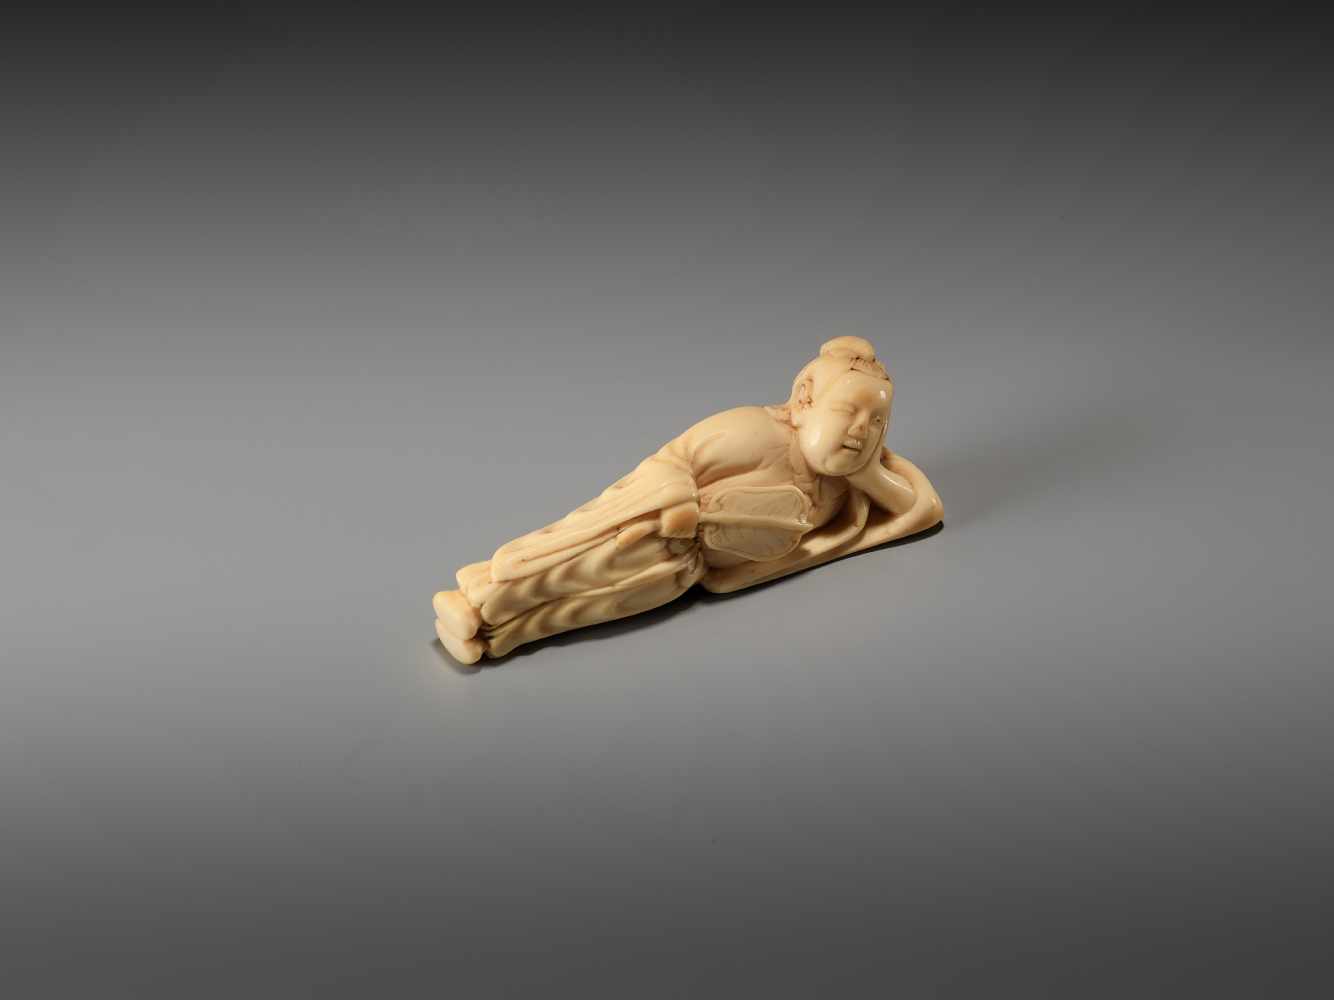 AN IVORY NETSUKE OF A RECLINING CHINESE IMMORTAL WITH A FANUnsigned, ivory netsukeJapan, late 18th - Image 2 of 6